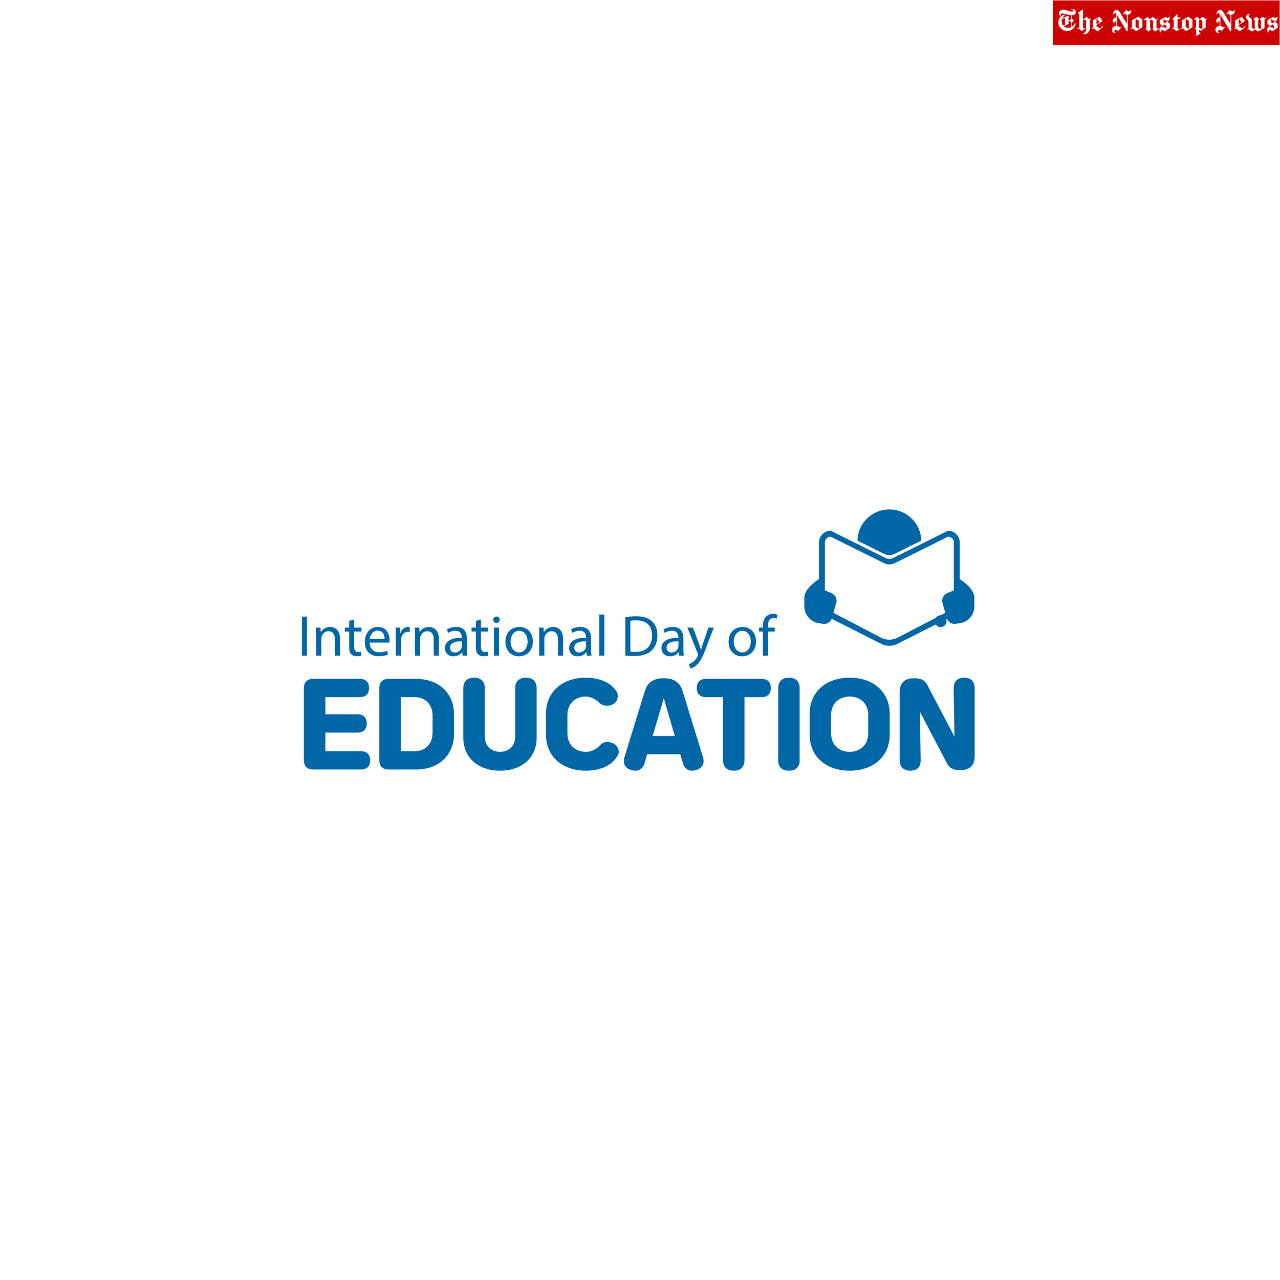 International Day of Education 2022 Instagram Captions, Facebook Status, WhatsApp Status, Greetings, Twitter Wishes to Share